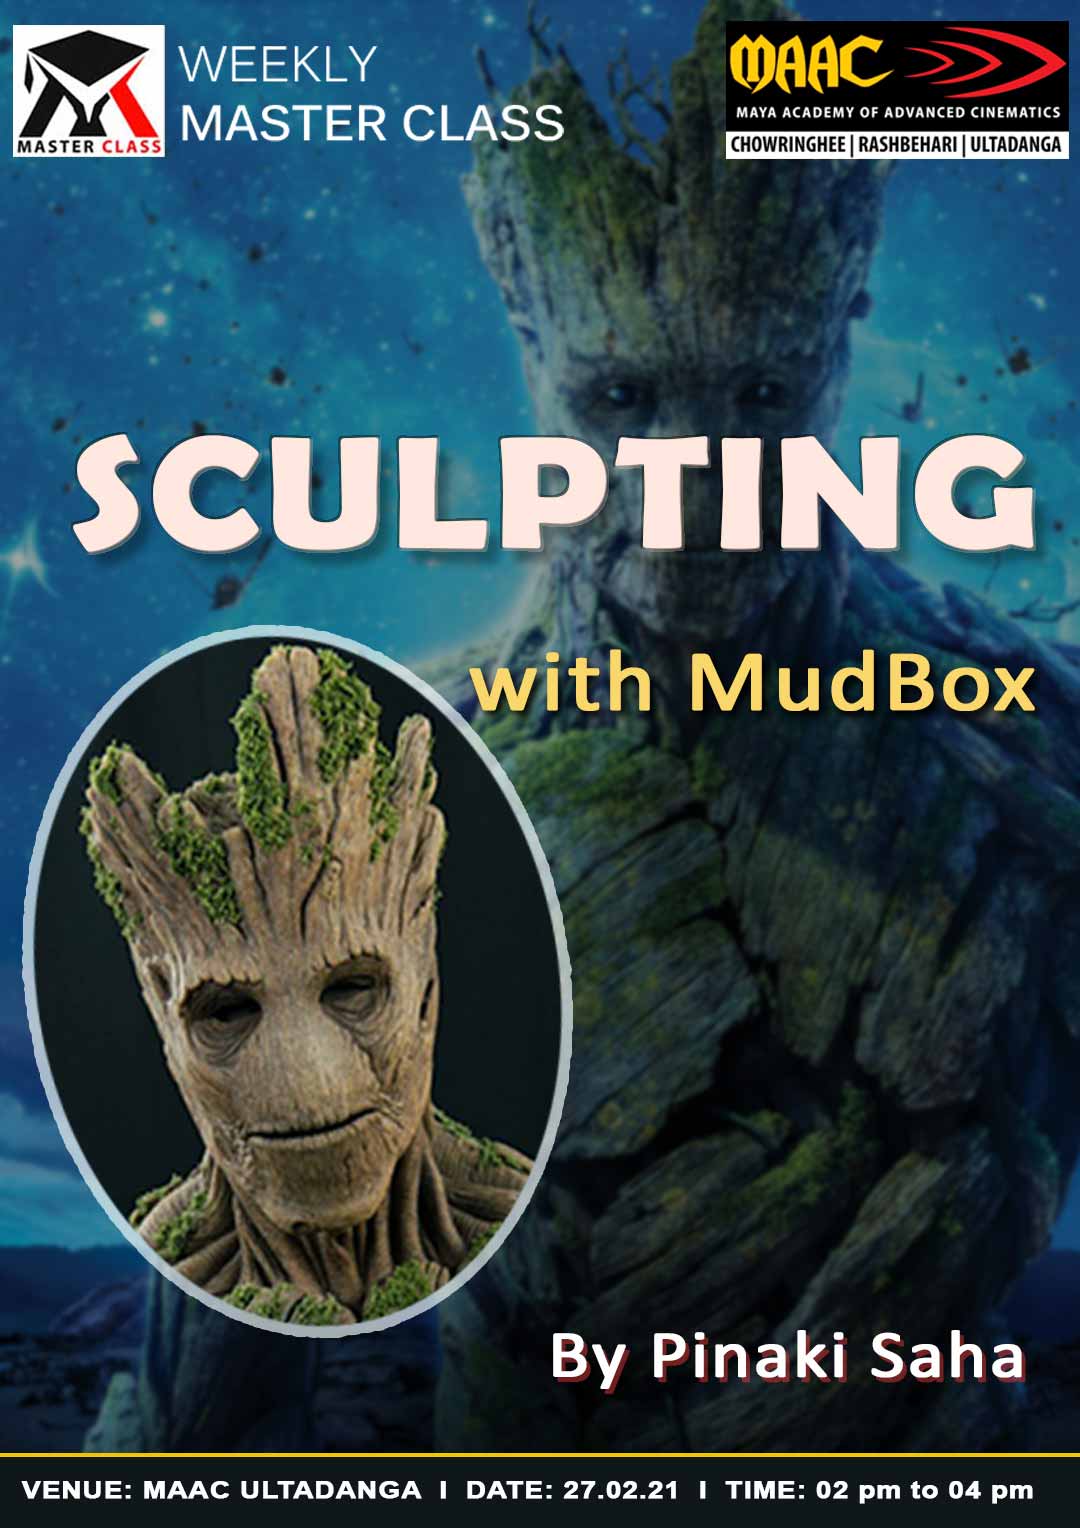 Weekly Master Class on Sculpting in Mudbox